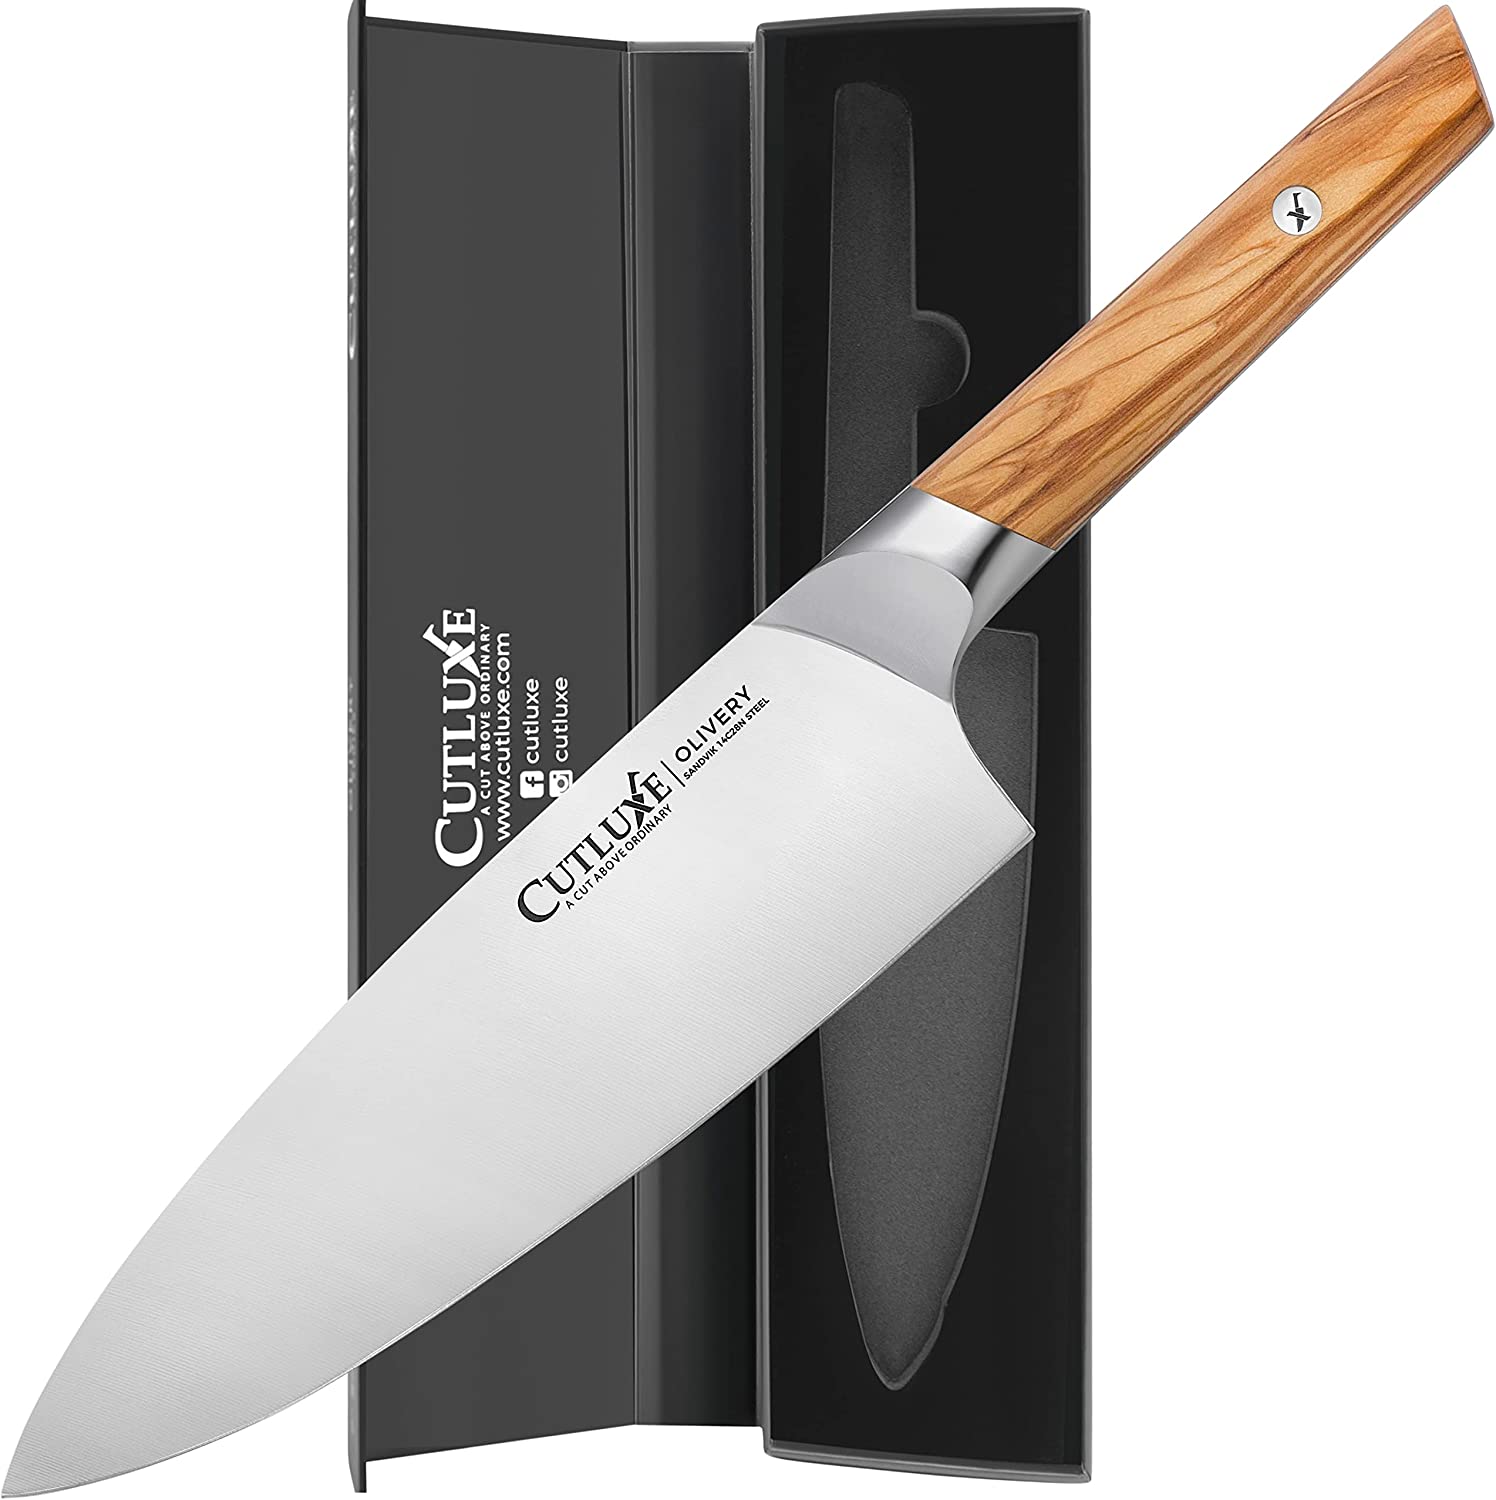 Food Tool Friday: The Cutting-Edge Allure of Ceramic Knives « Food